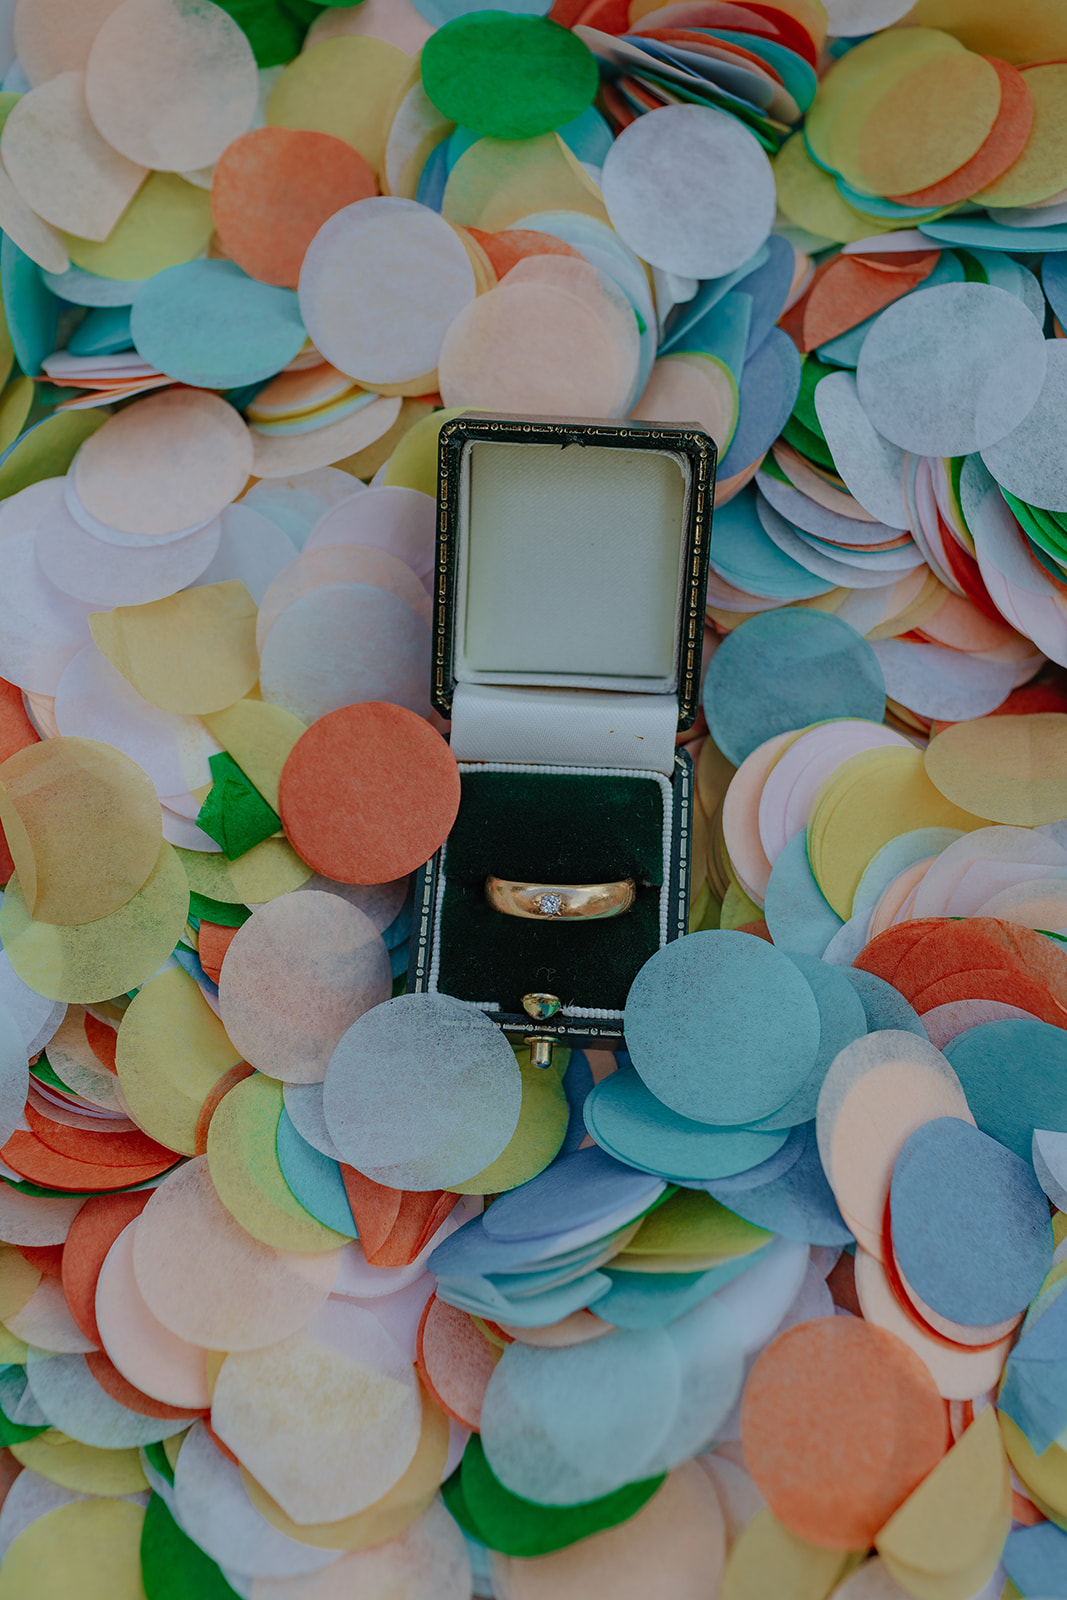 wedding ring on bed of confetti by flutterdarlings